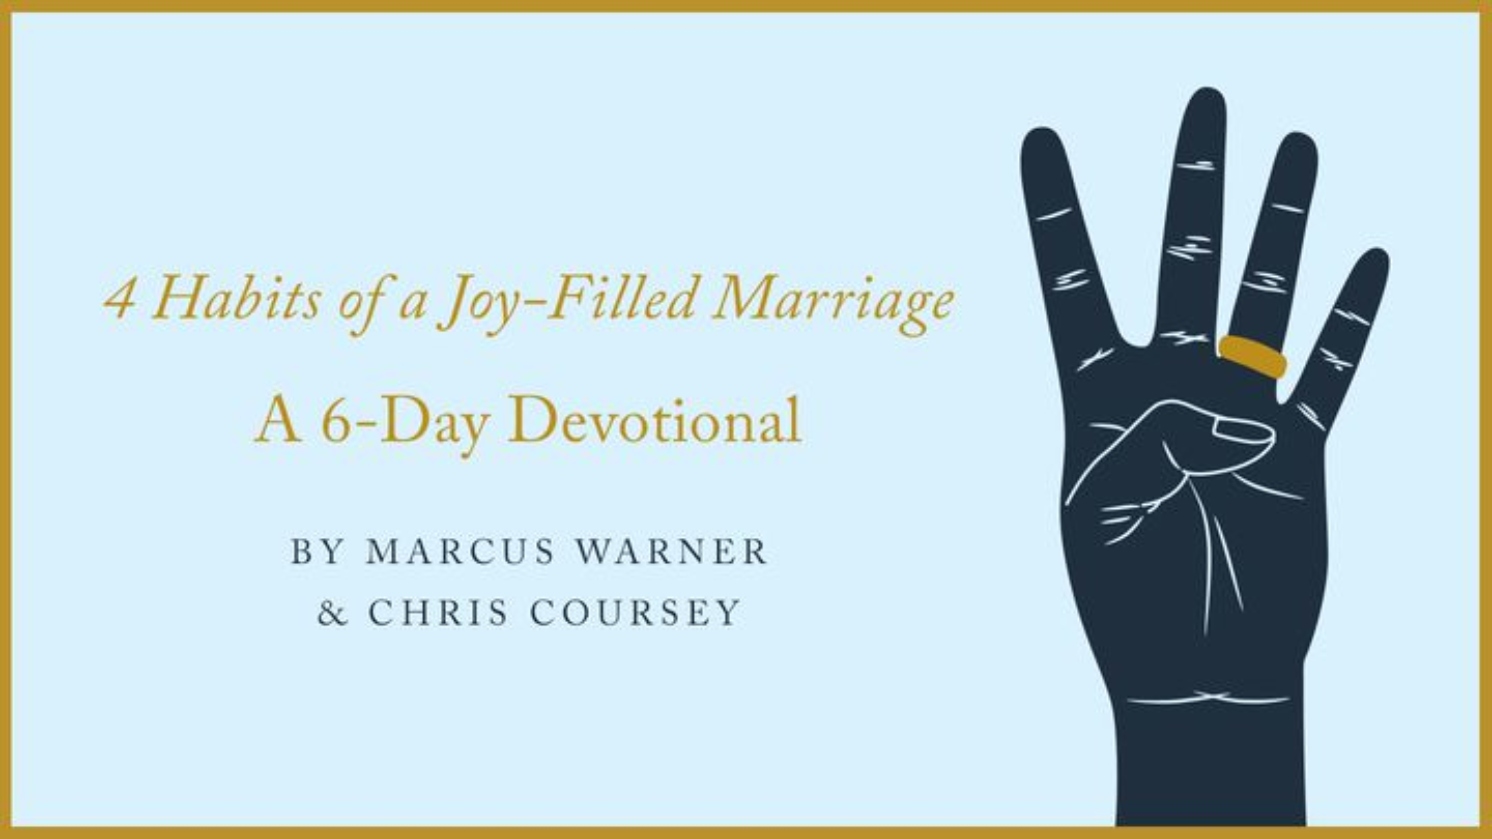 4 Habits of A Joy-Filled Marriage